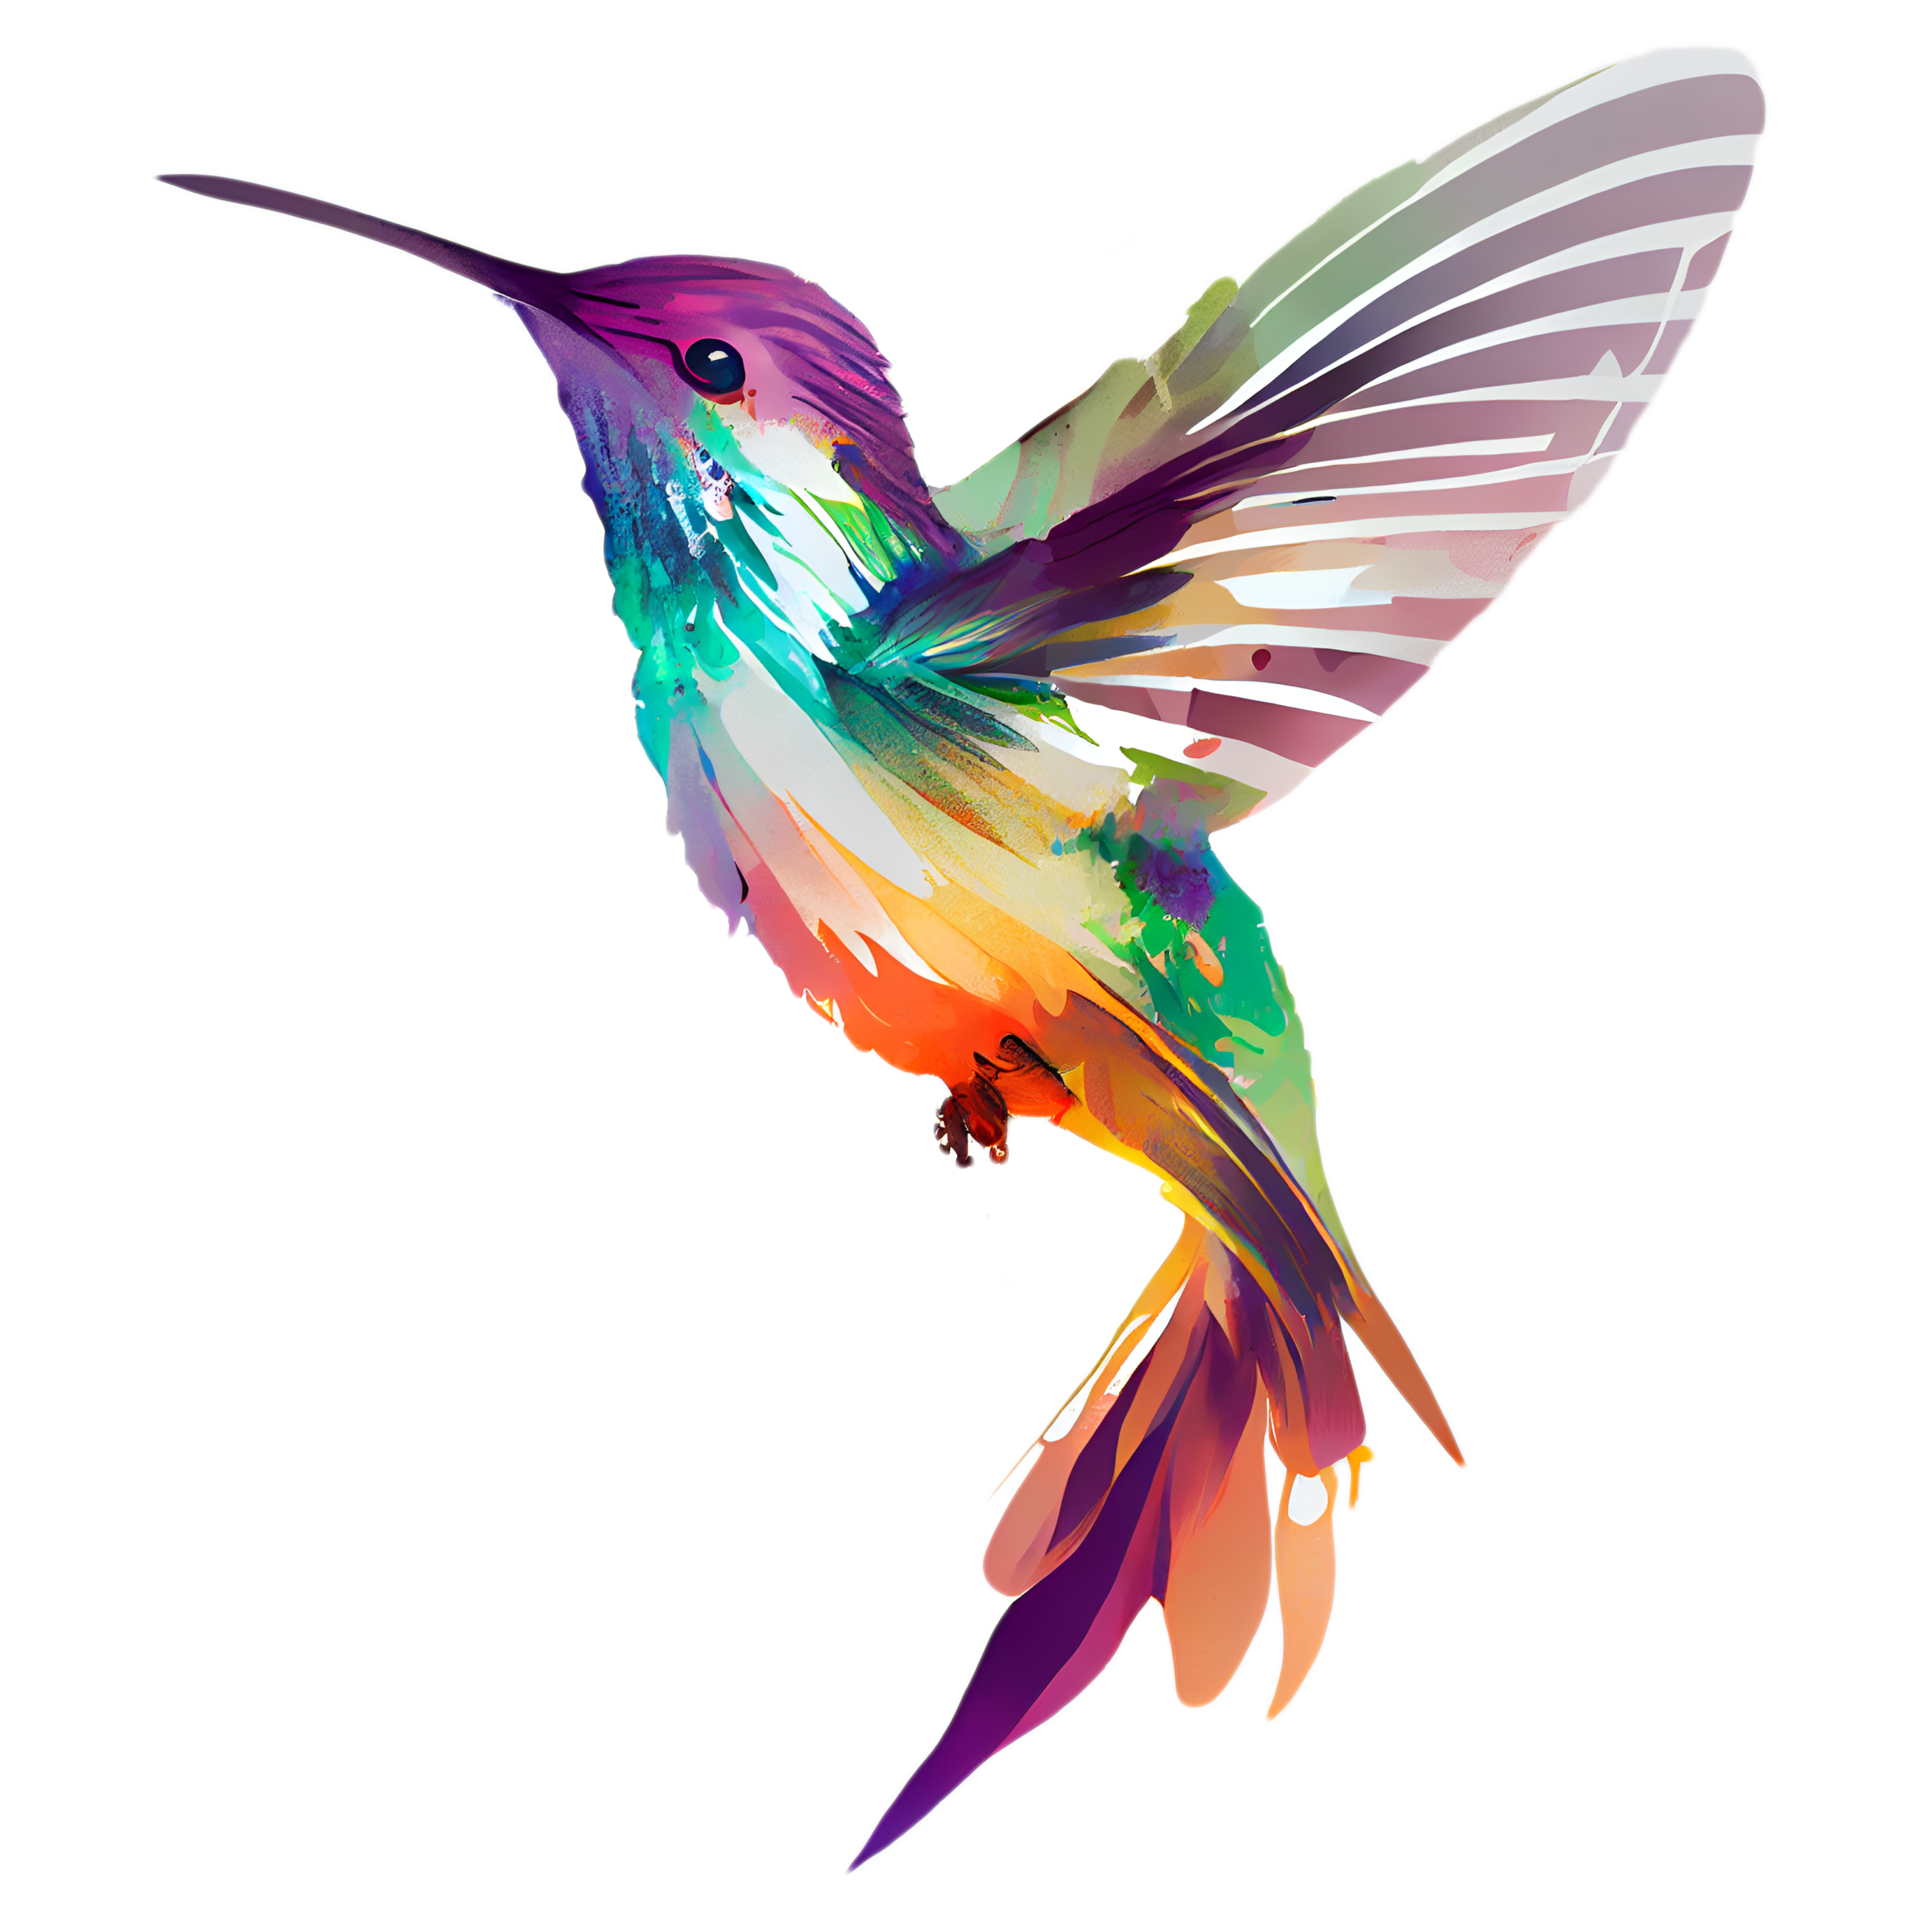 Hummingbird PNGs for Free Download